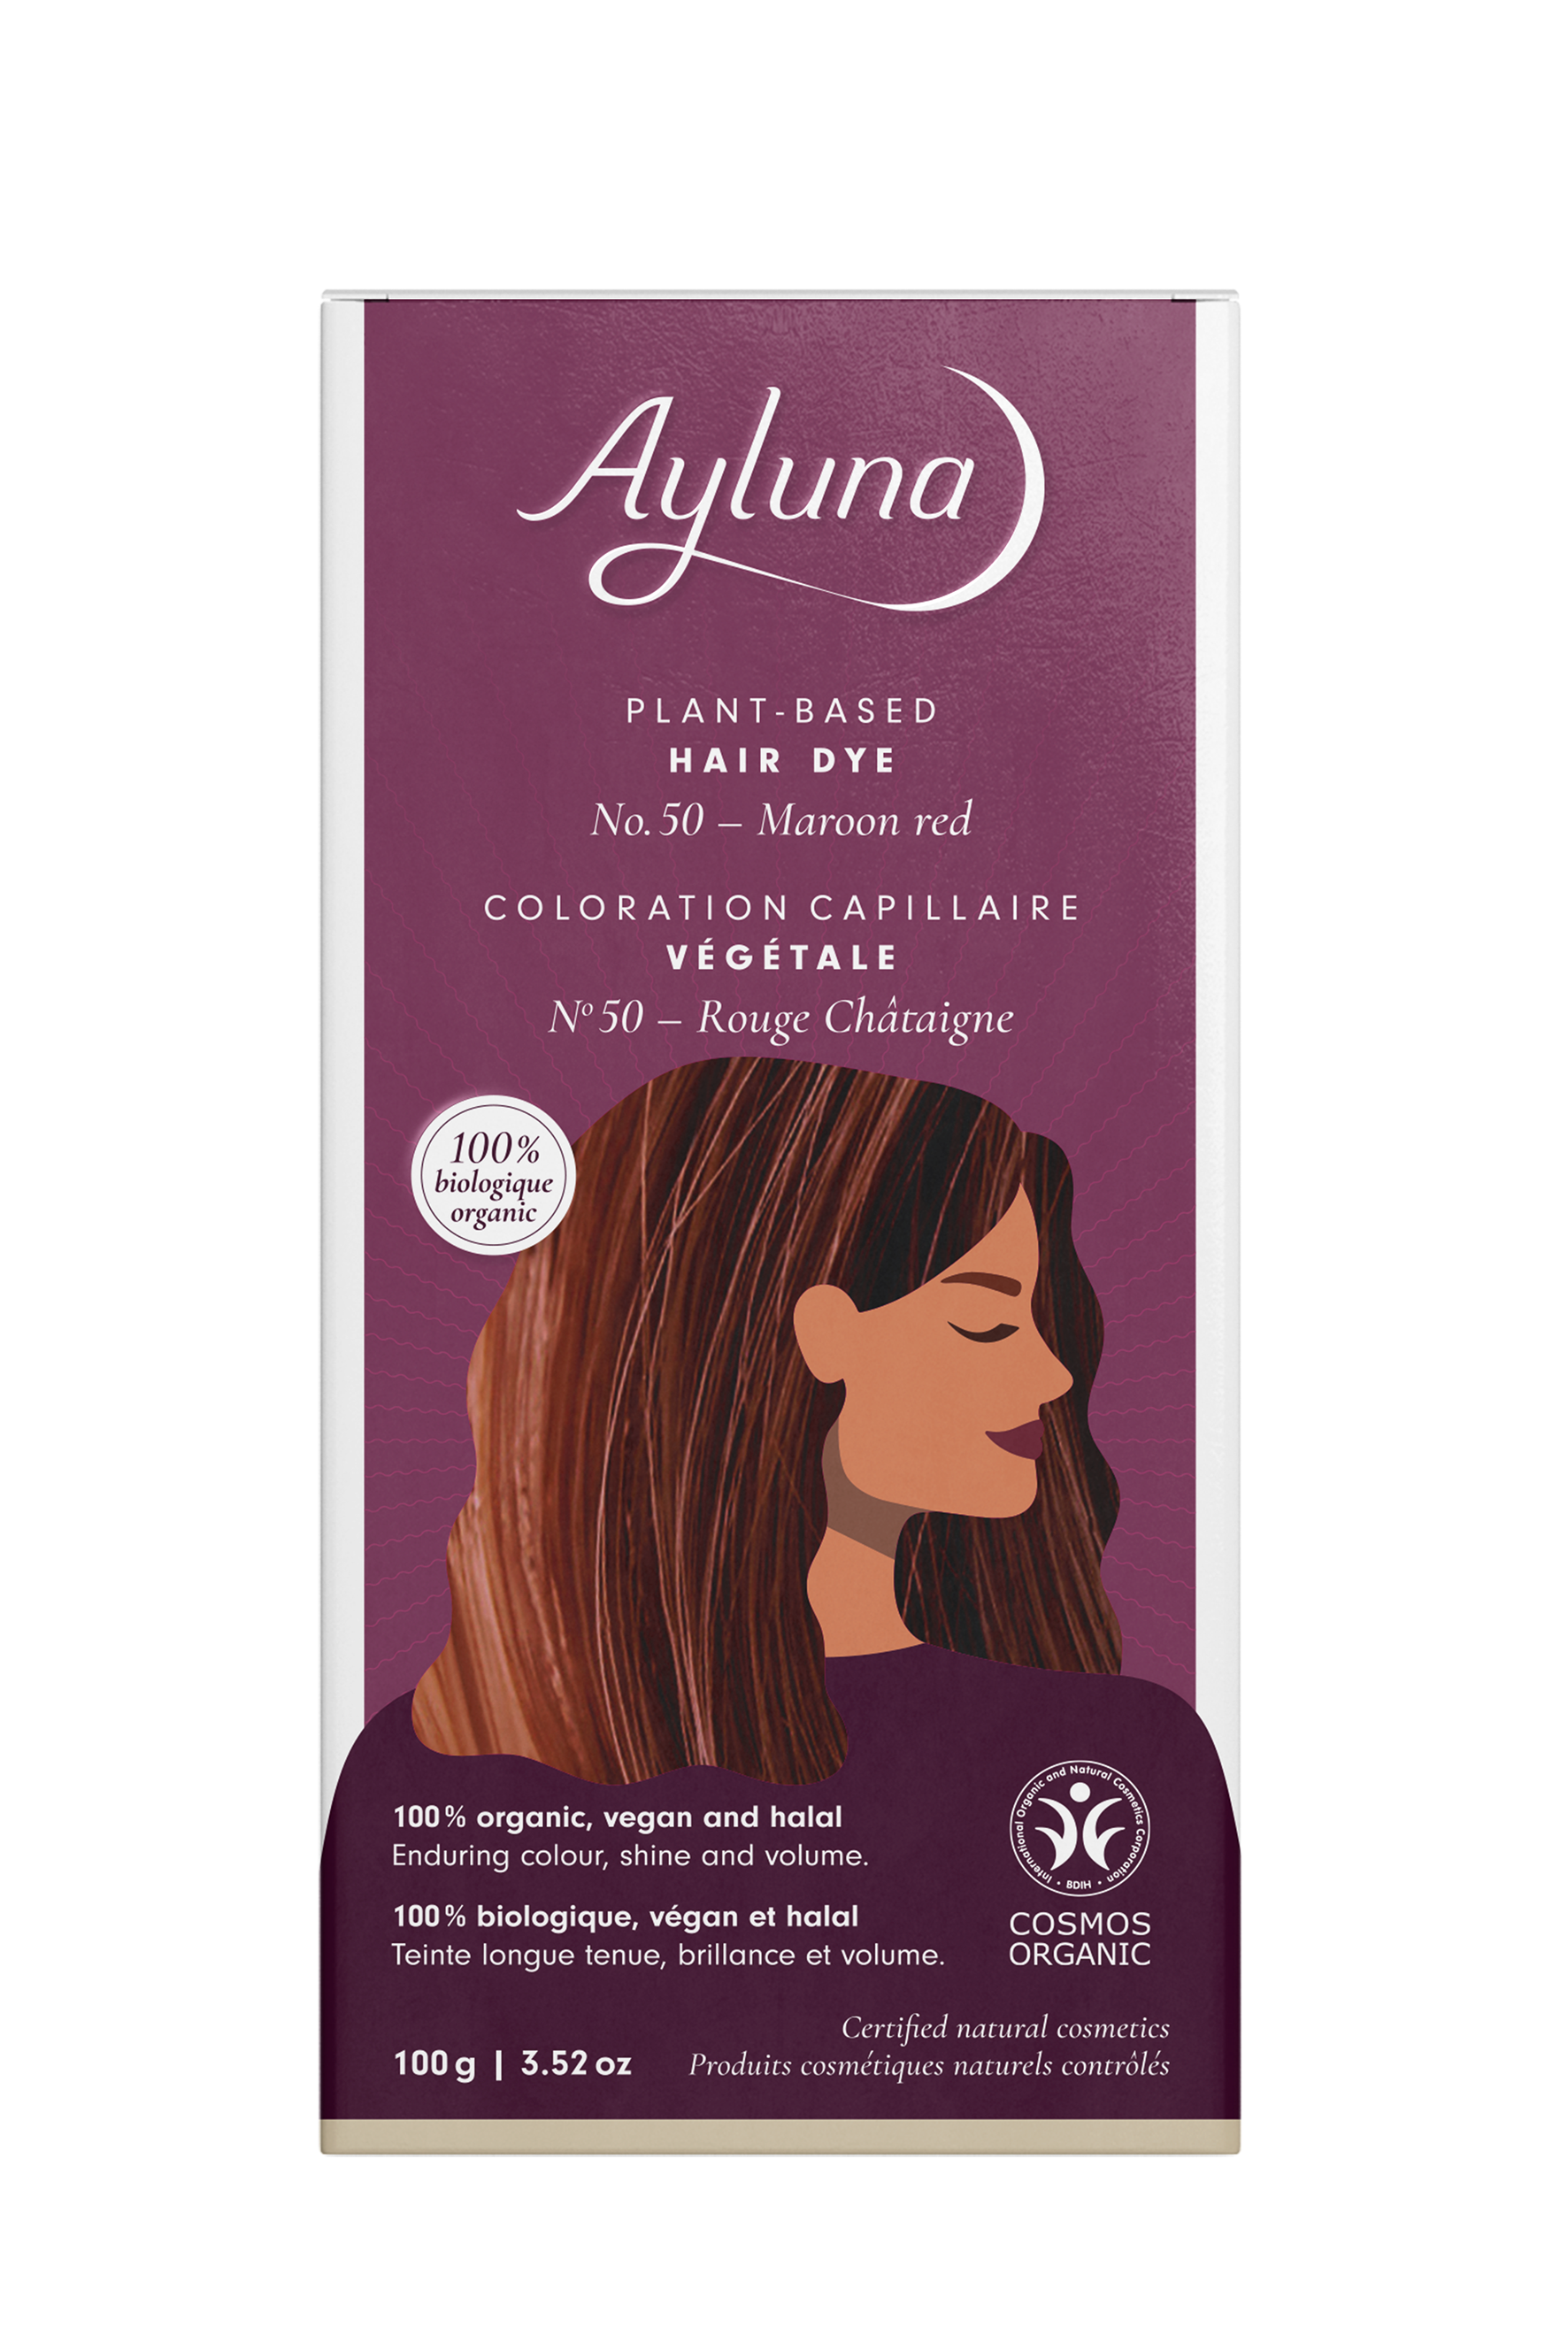 PLANT-BASED HAIR DYE NO. 50, MAROON RED